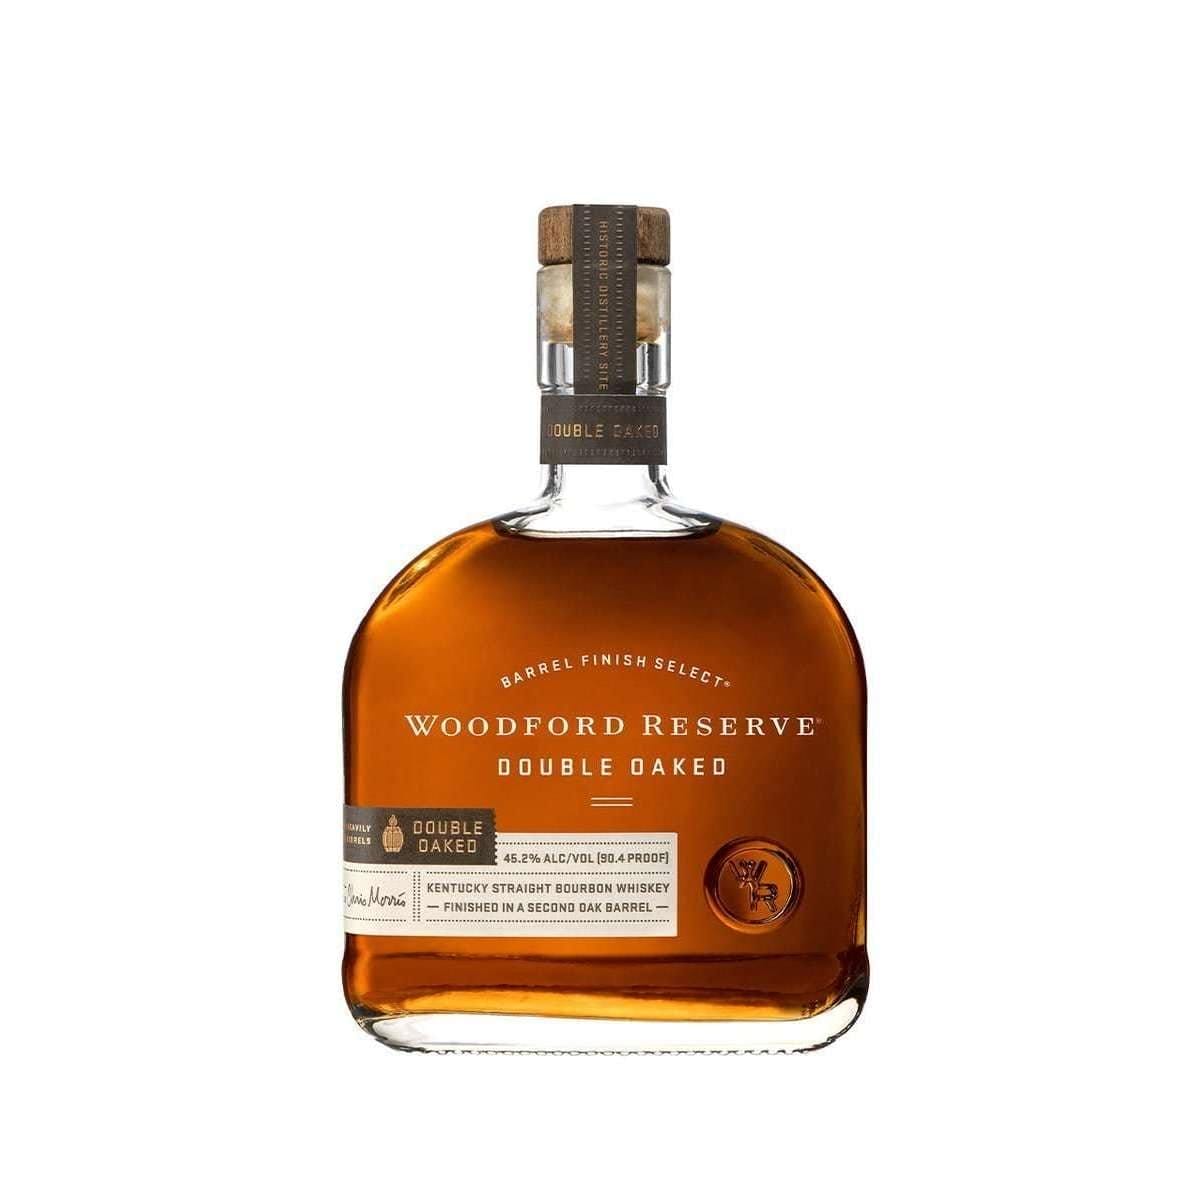 7 of the Best Smooth Whiskeys Commonly Available - Mike Willey